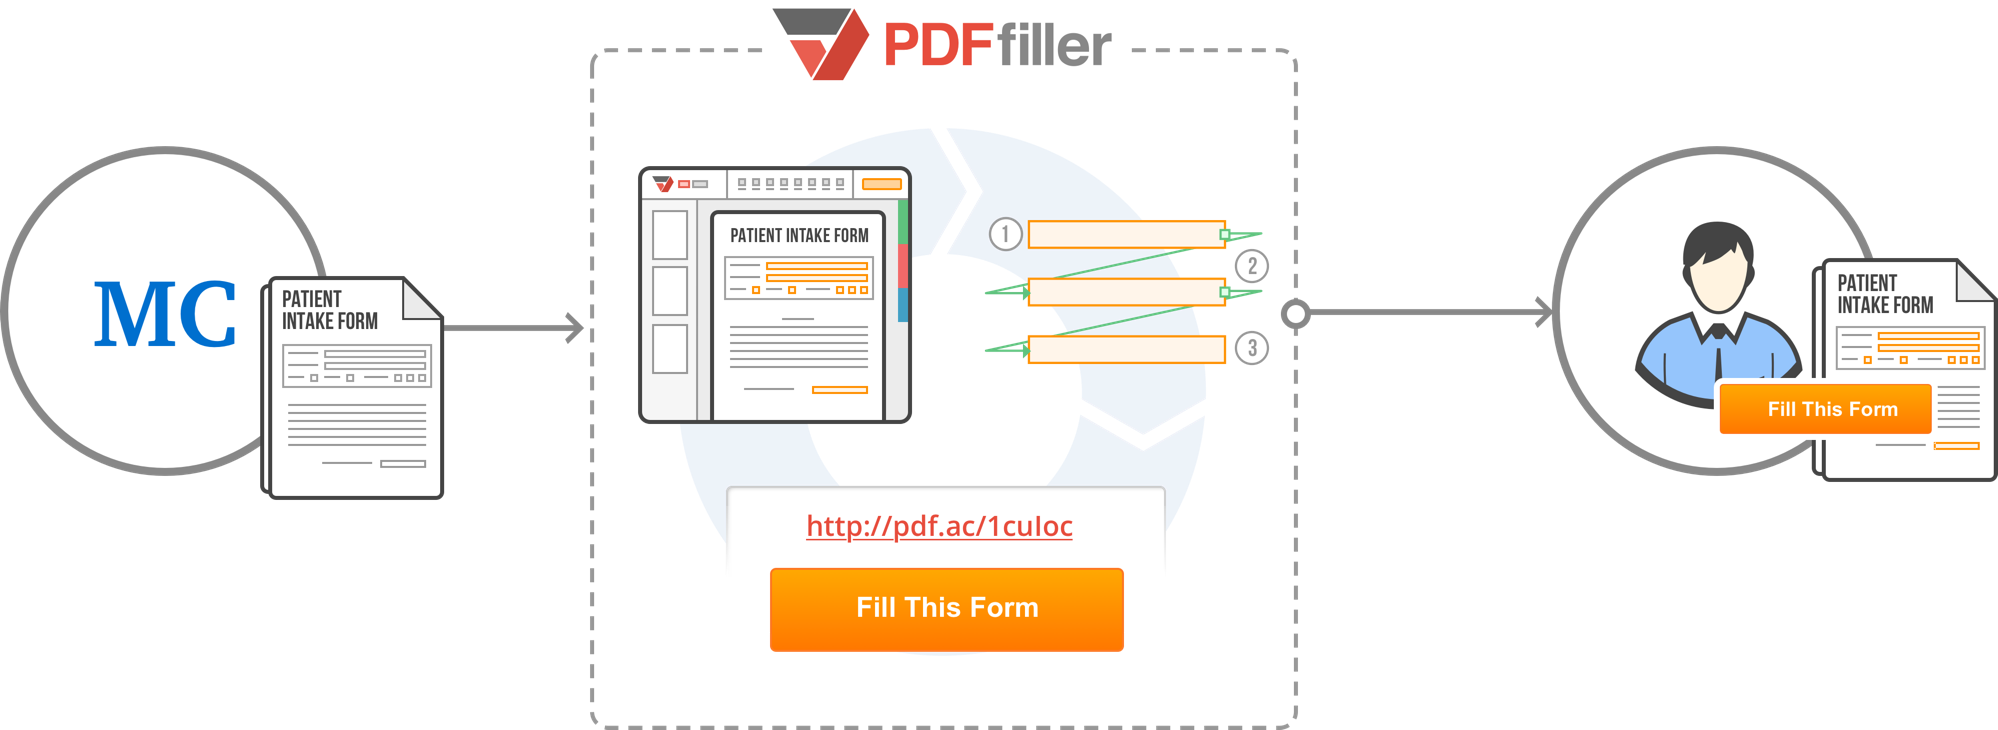 Fig A. – Creating a filliable patient intake form with PDFfiller